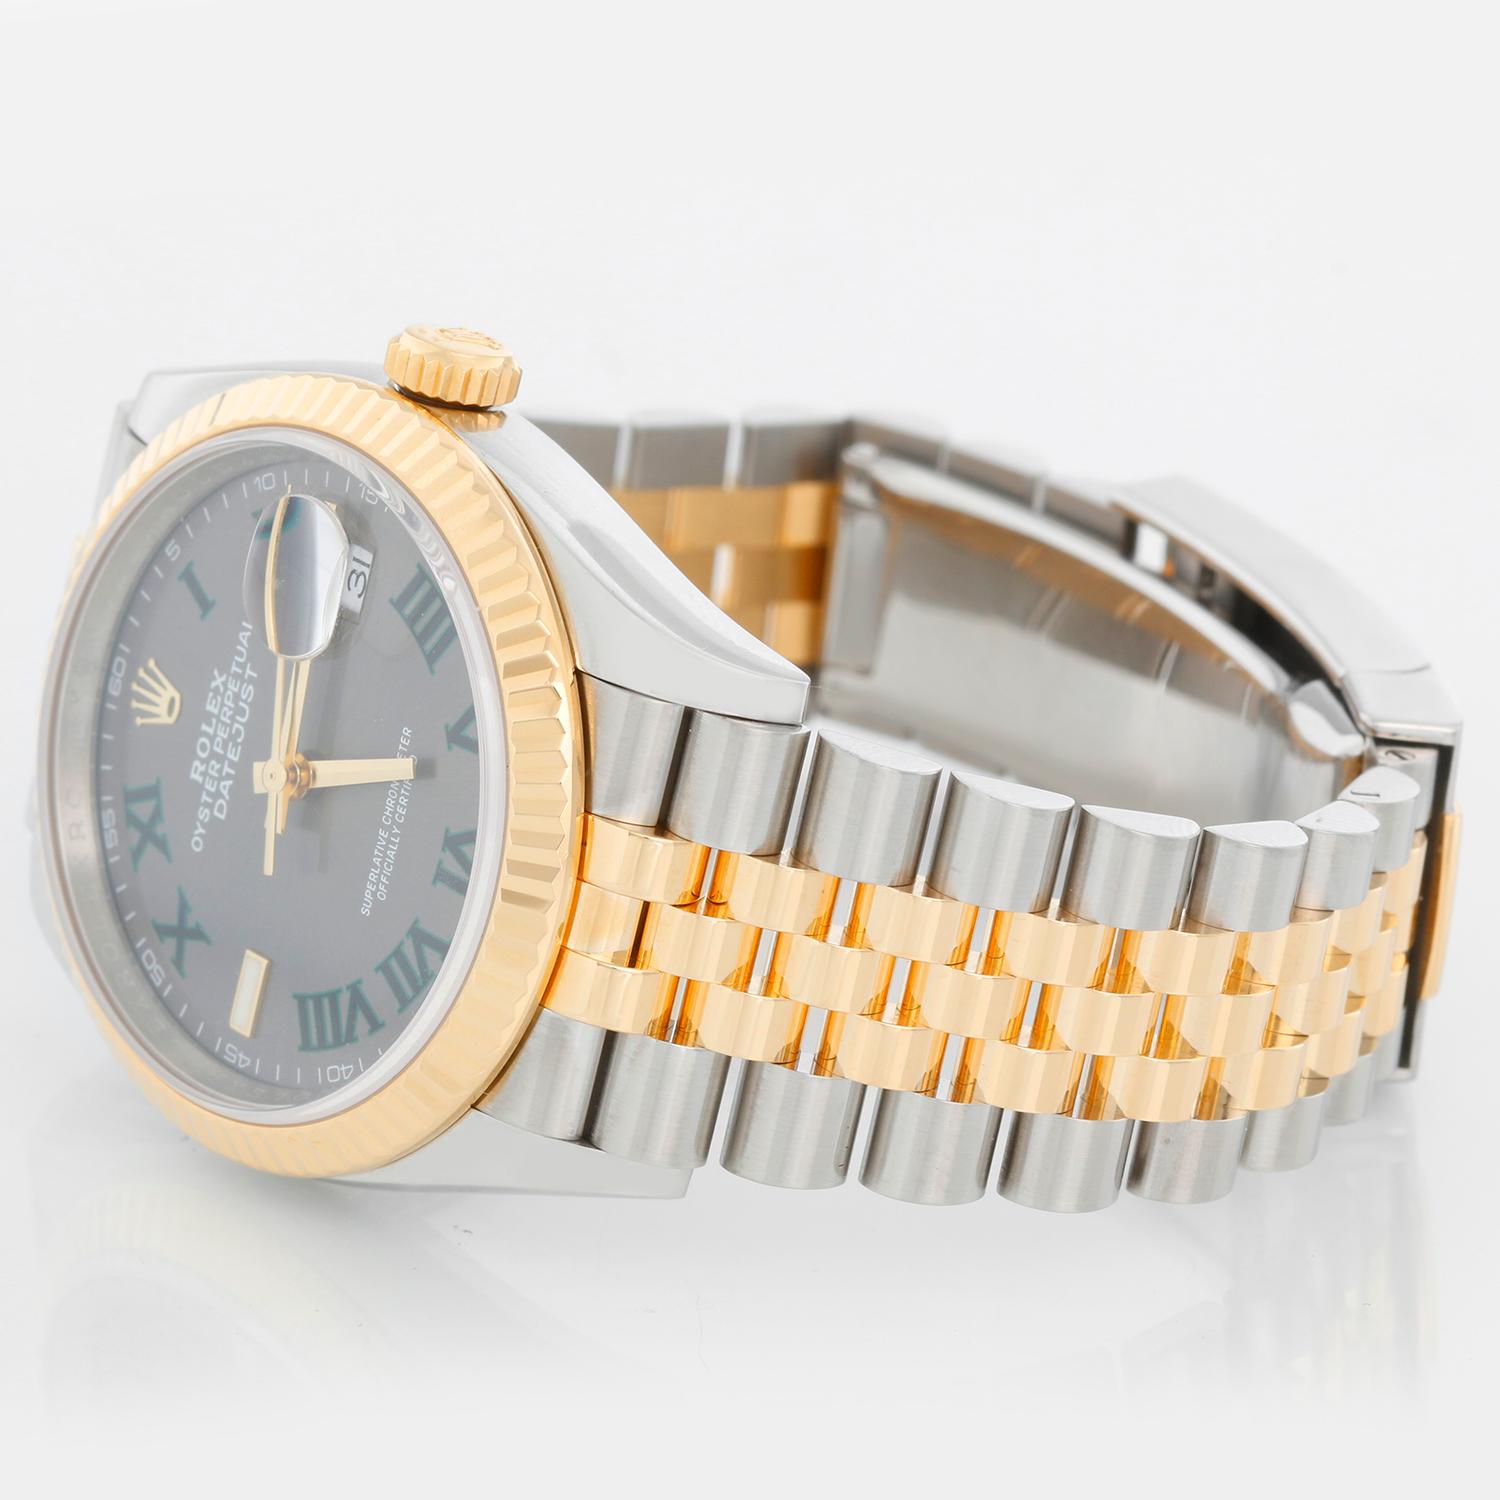 Rolex Datejust Men's 2-Tone Watch 126233 - Automatic winding, 31 jewels, Quickset, sapphire crystal. Stainless steel case with 18k yellow gold fluted bezel . Wimbledon dial . Stainless steel and 18k yellow gold Jubilee bracelet. Pre-owned with box